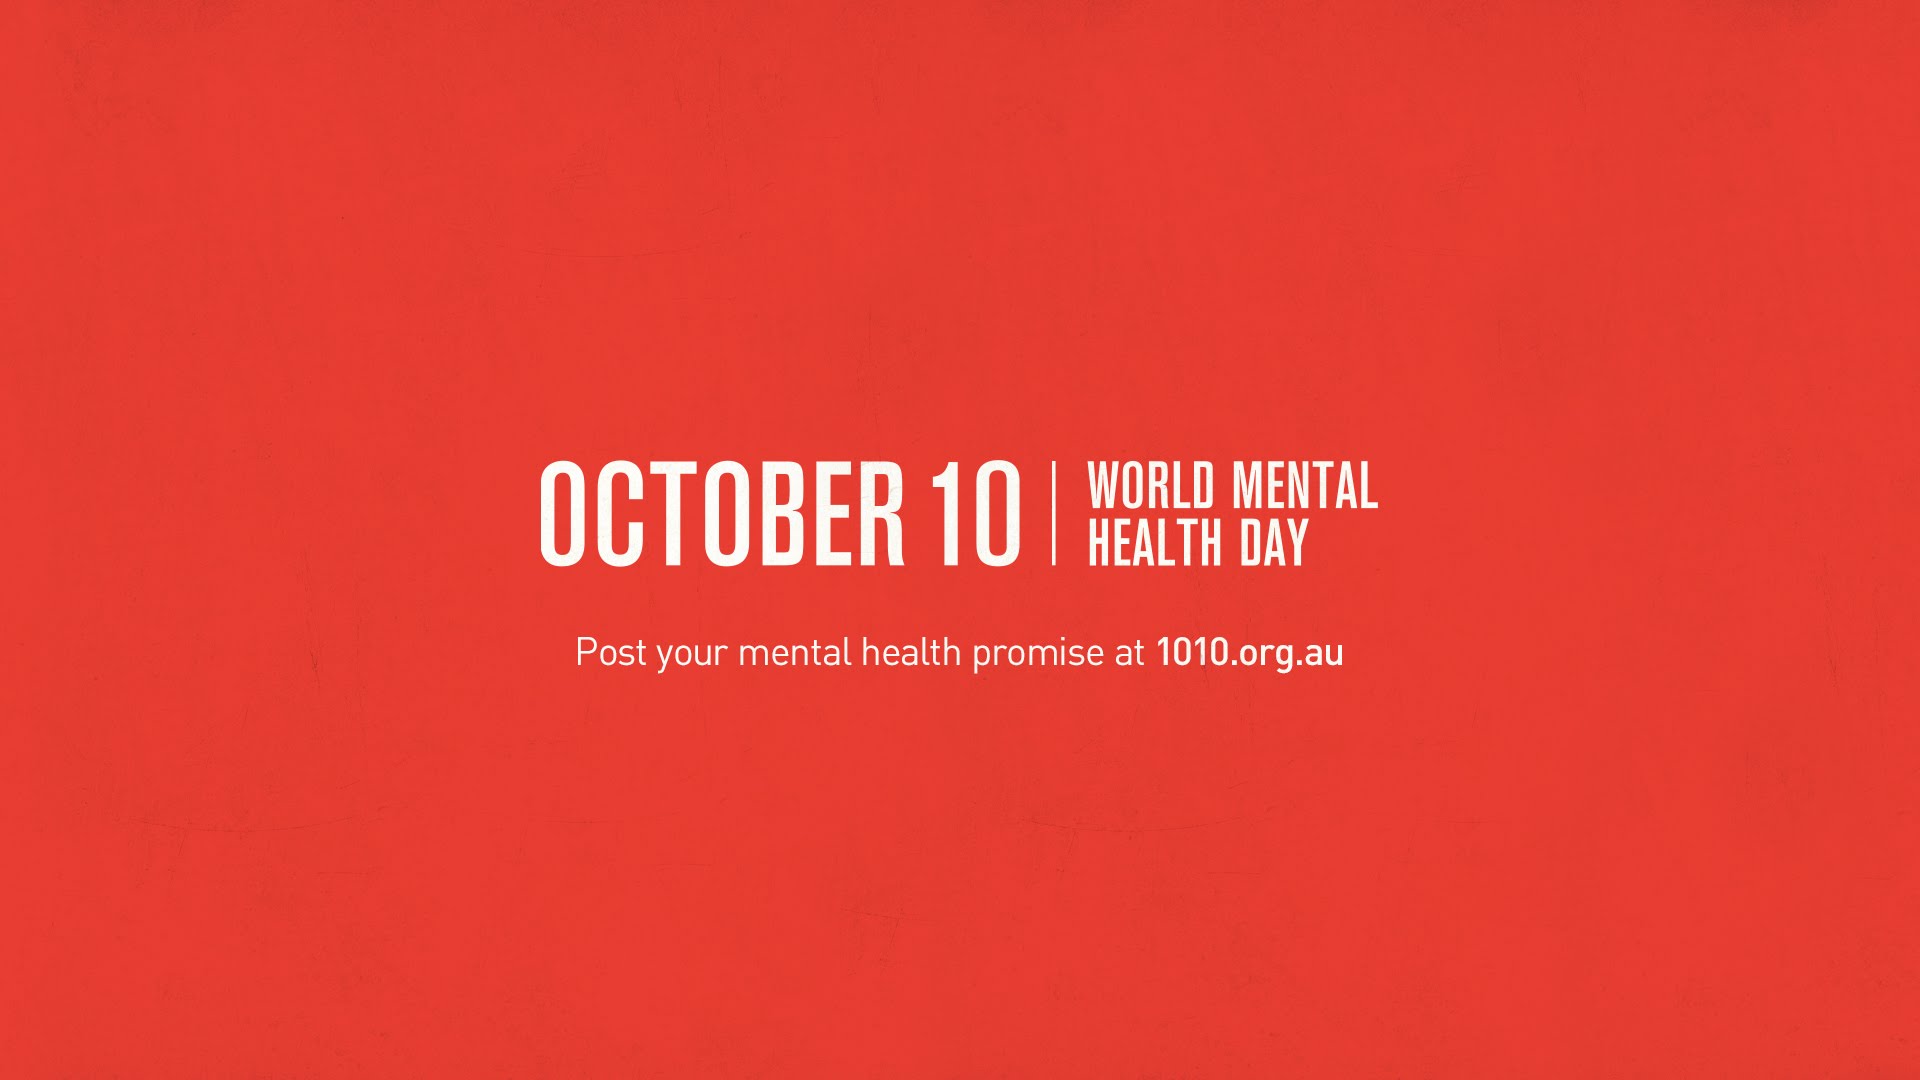 October 10 World Mental Health Day Wishes